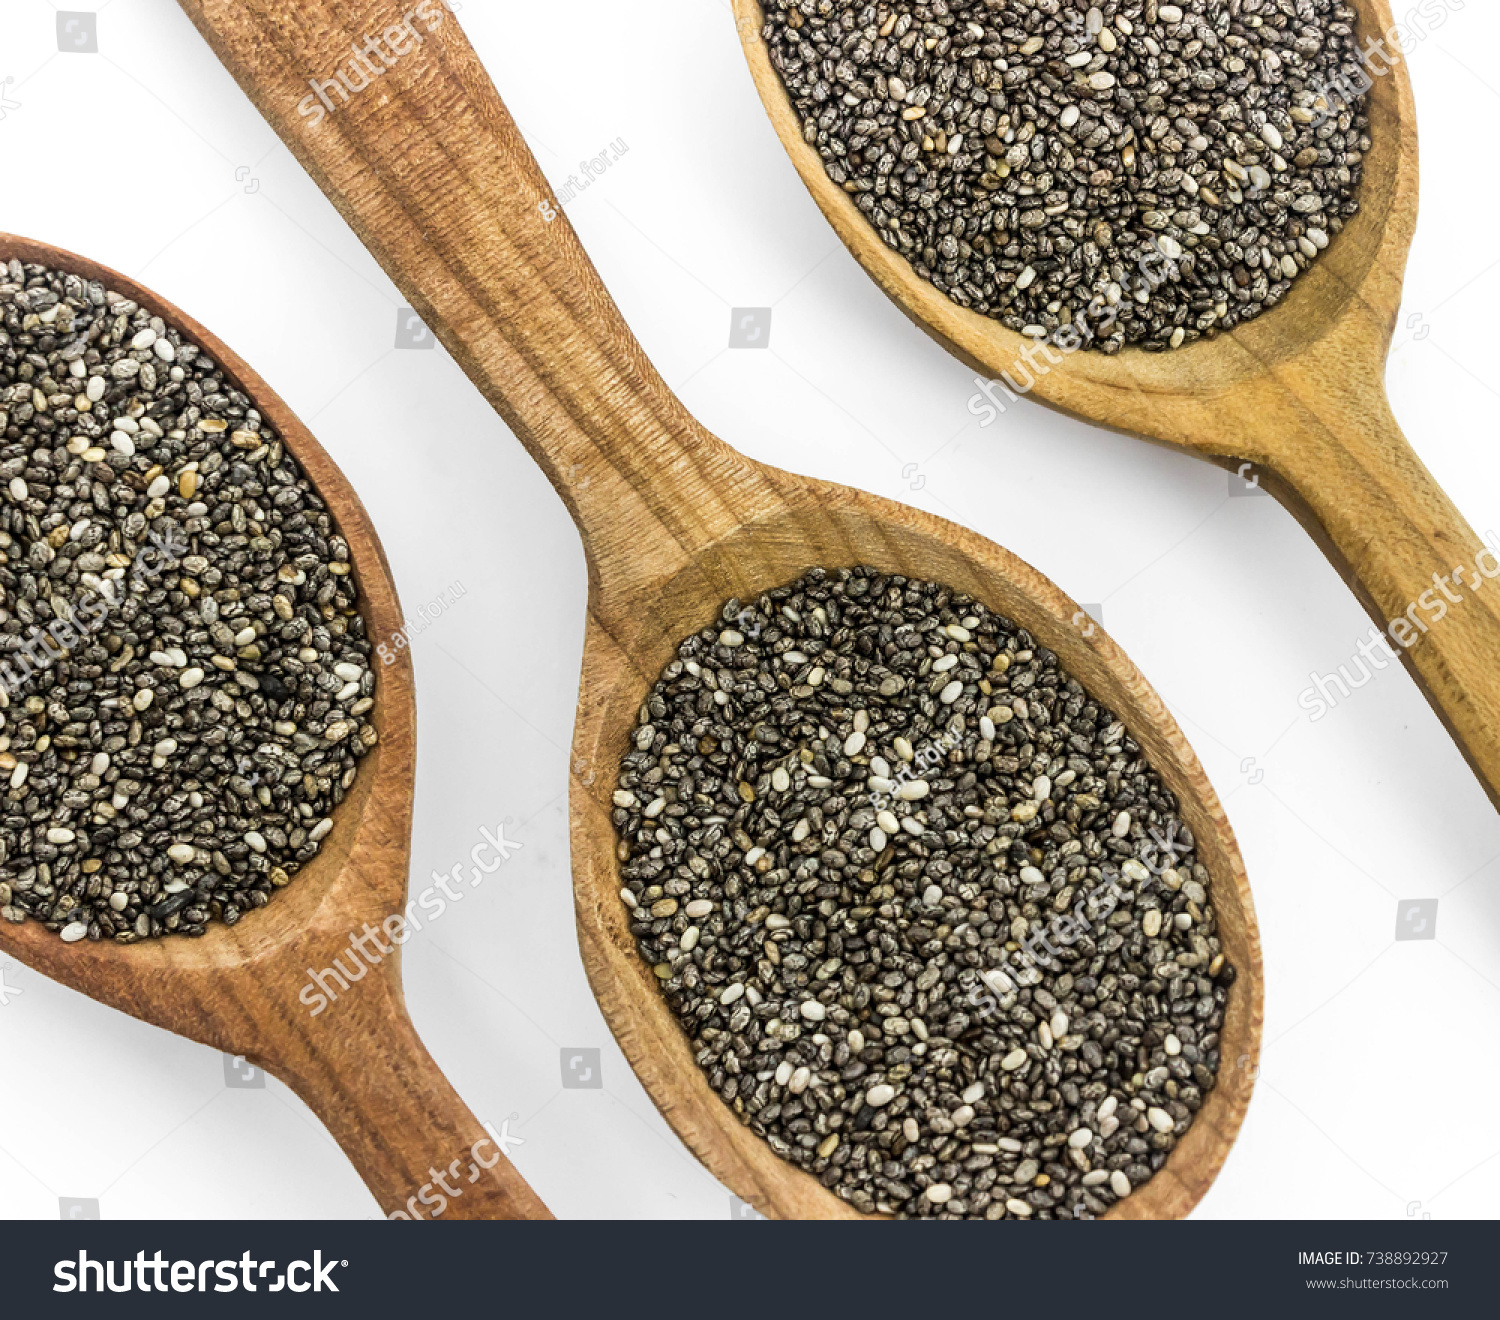 Salvia hispanica, commonly known as chia.
Three wooden spoon with chia seeds against the white background, isolated #738892927